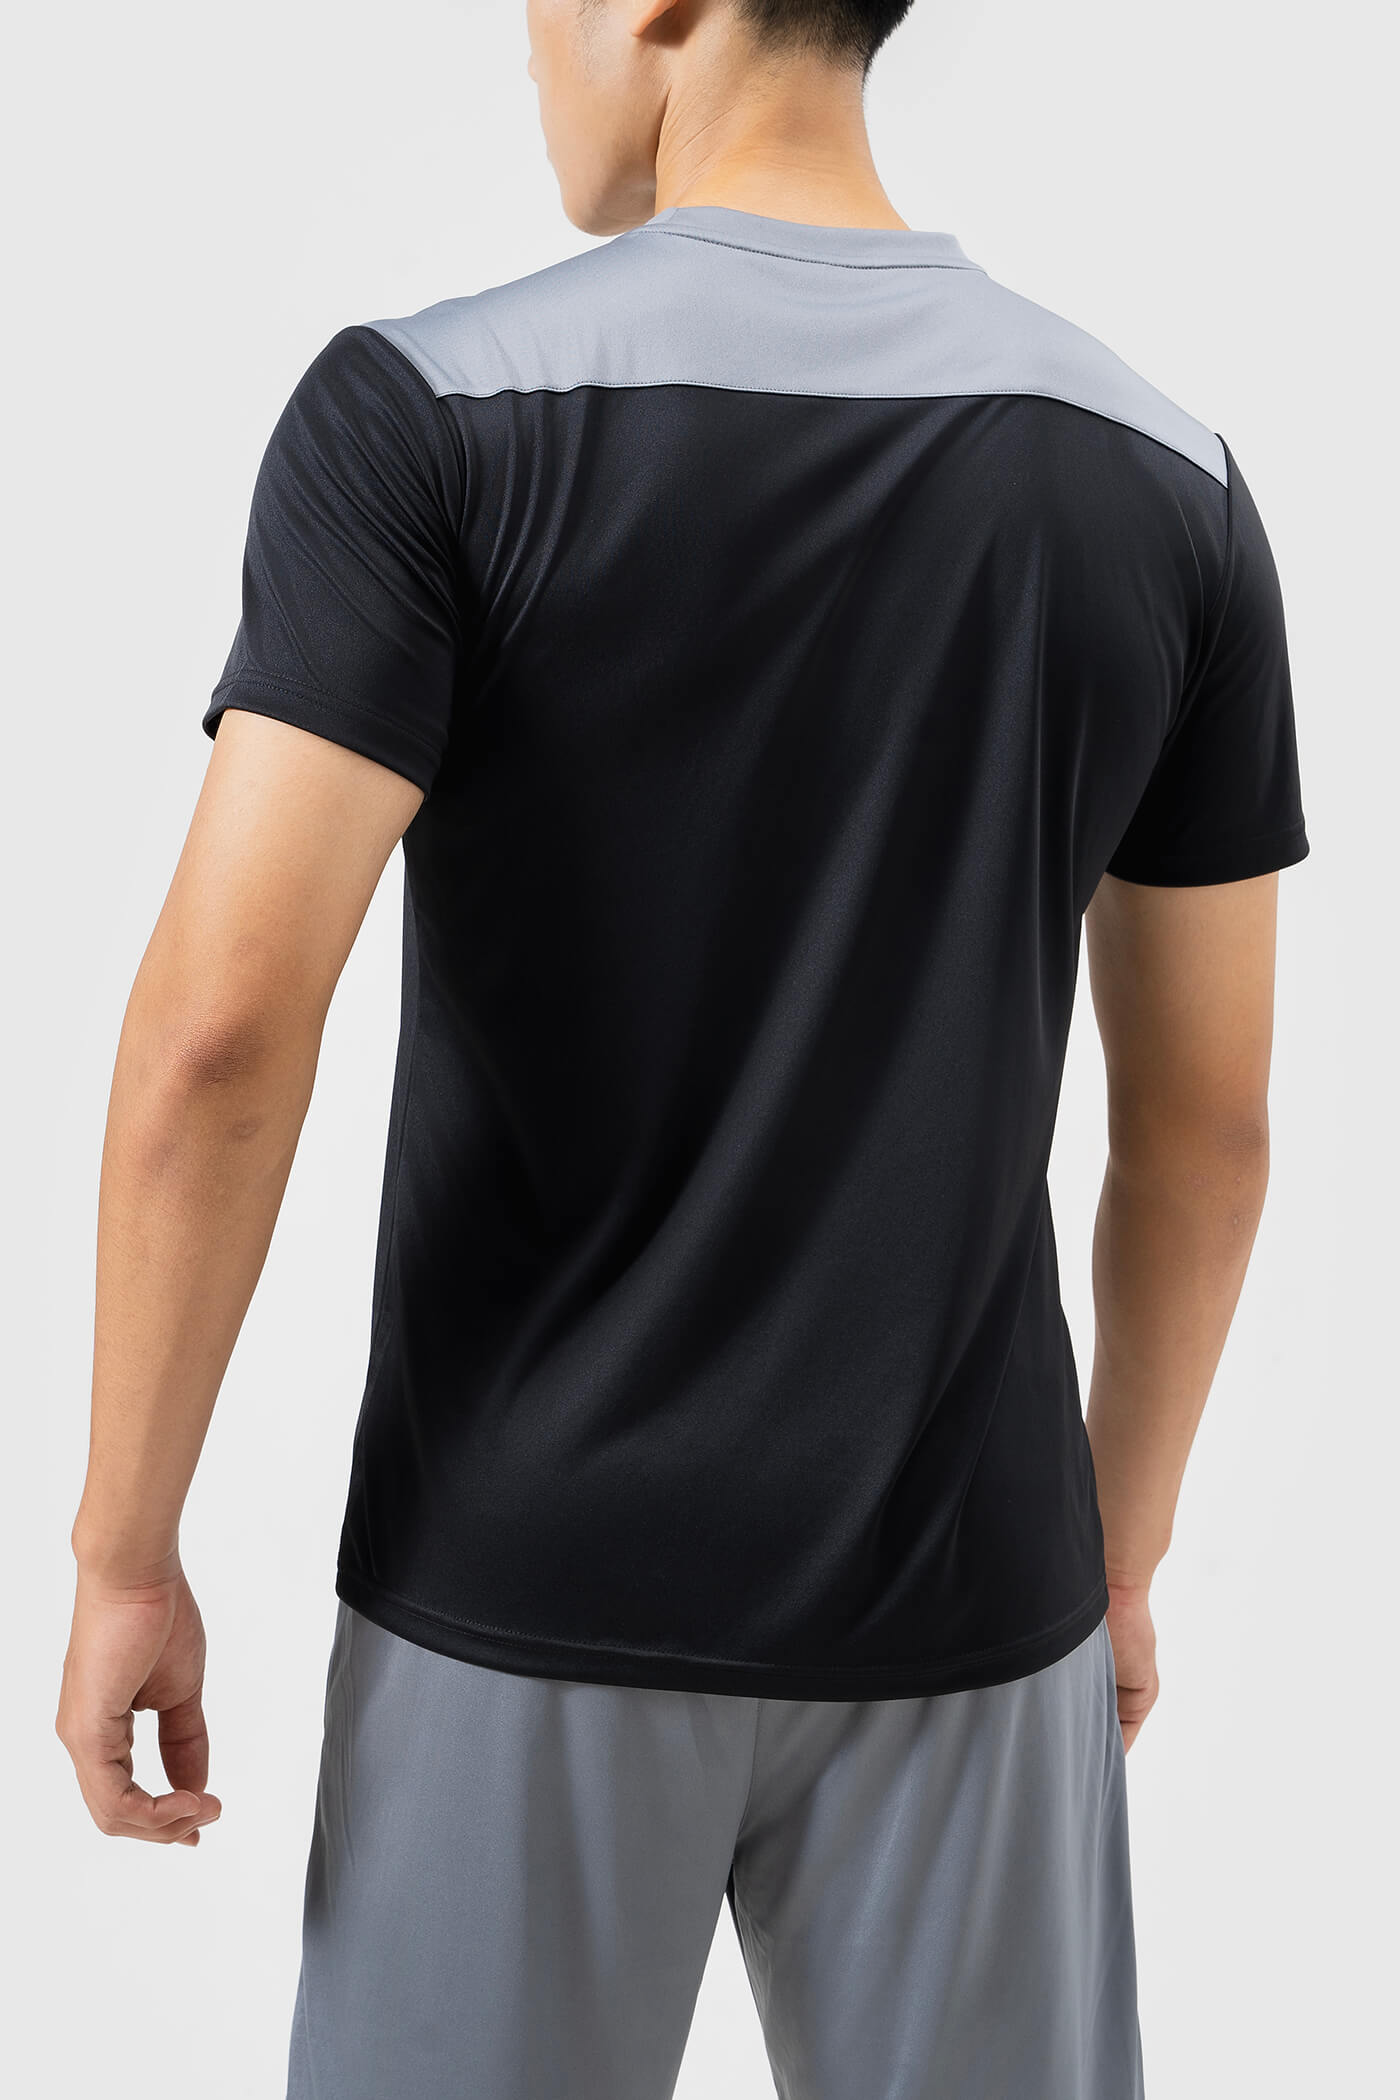 T-Shirt thể thao Active  1